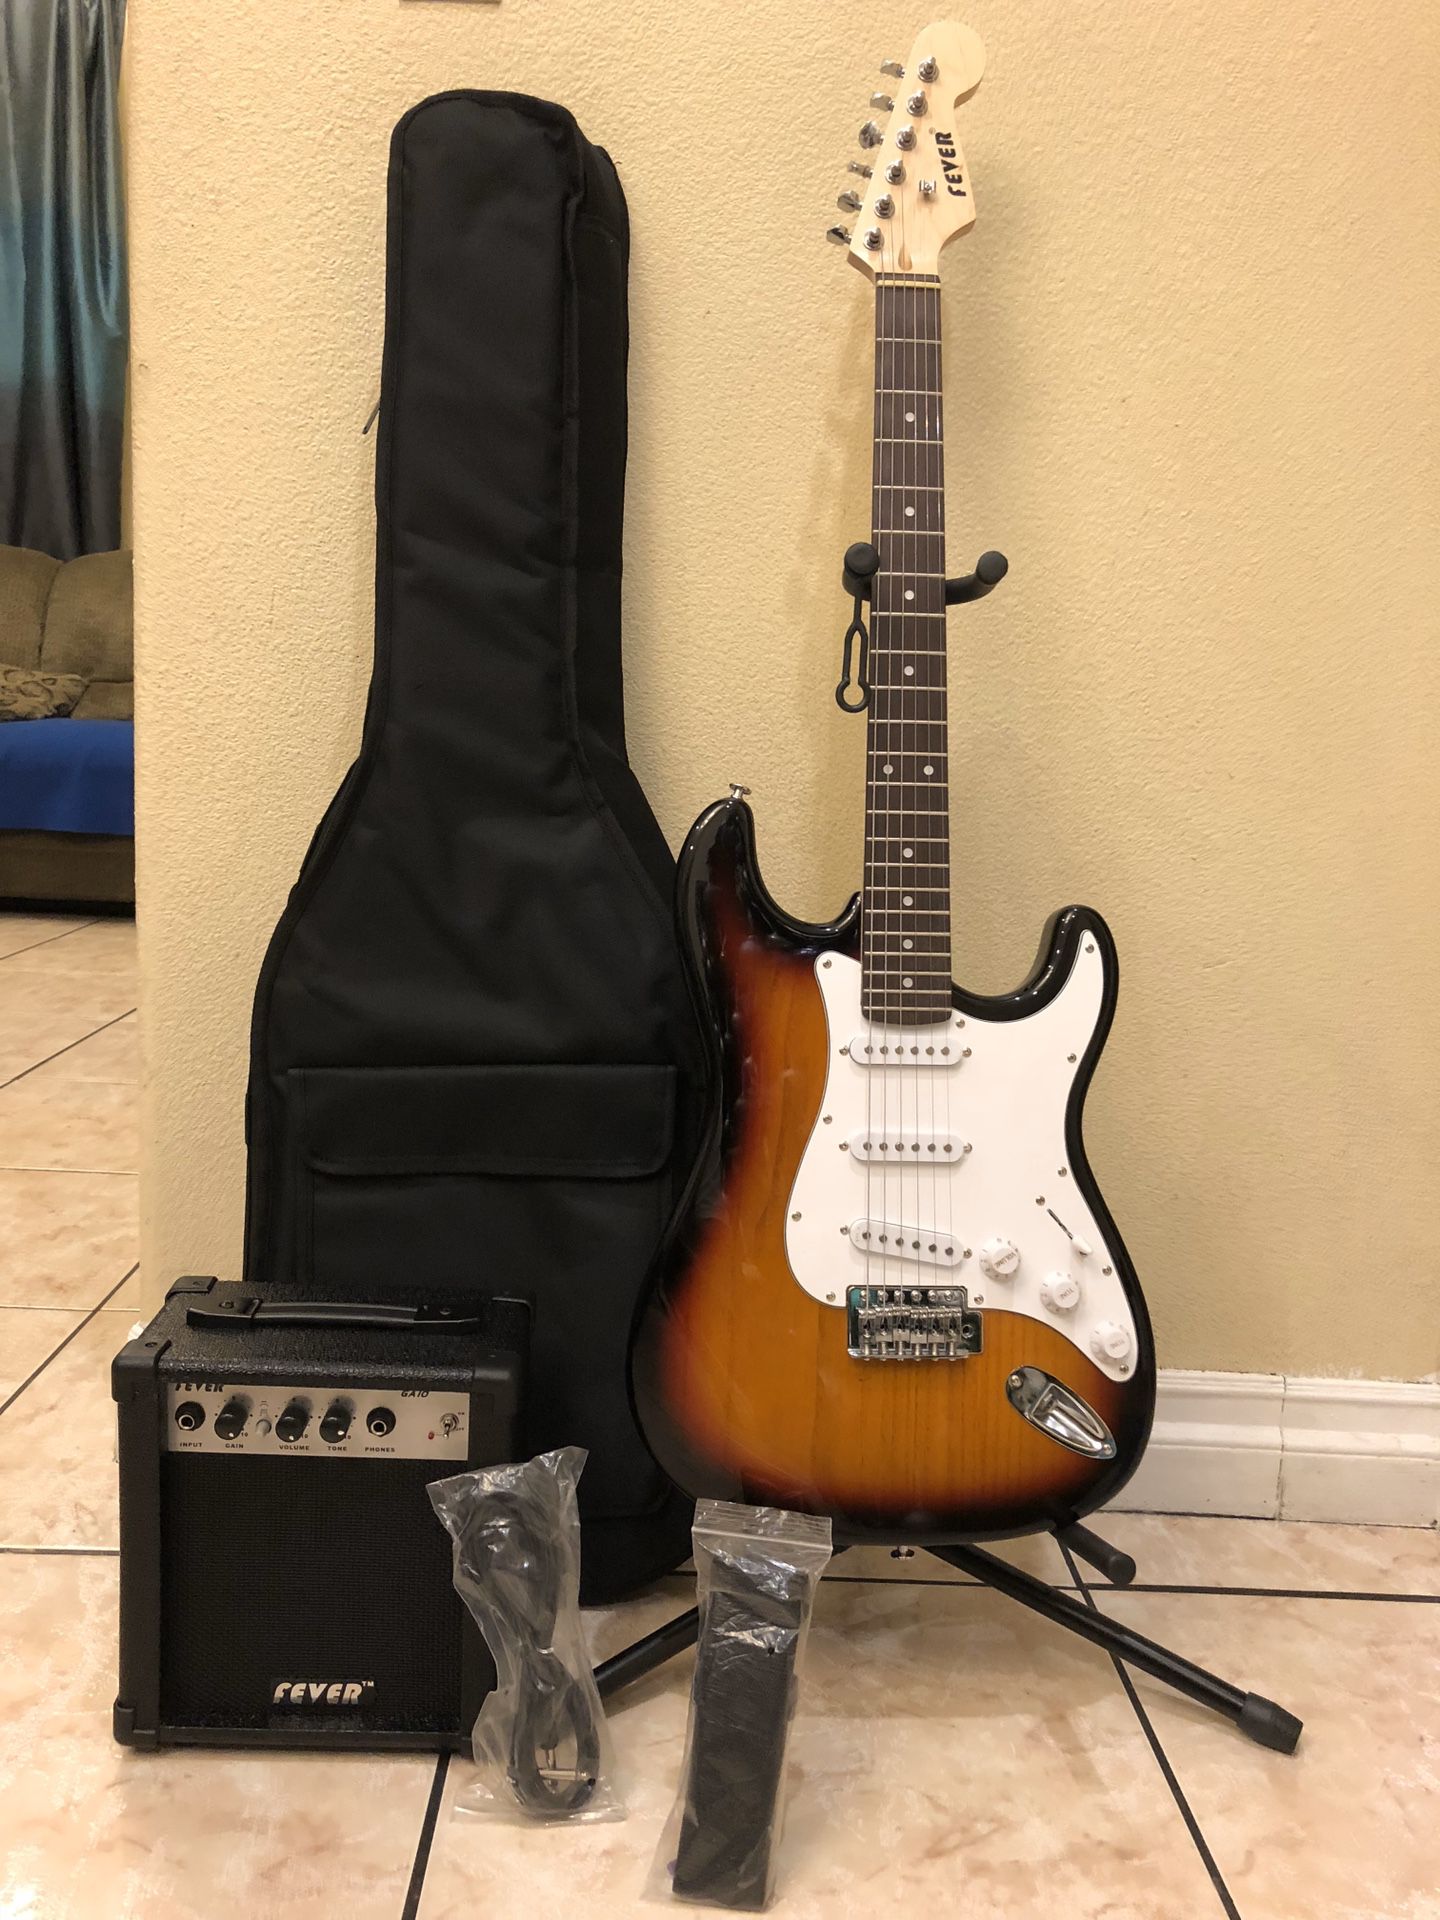 Fever electric guitar with case cable strap and amp